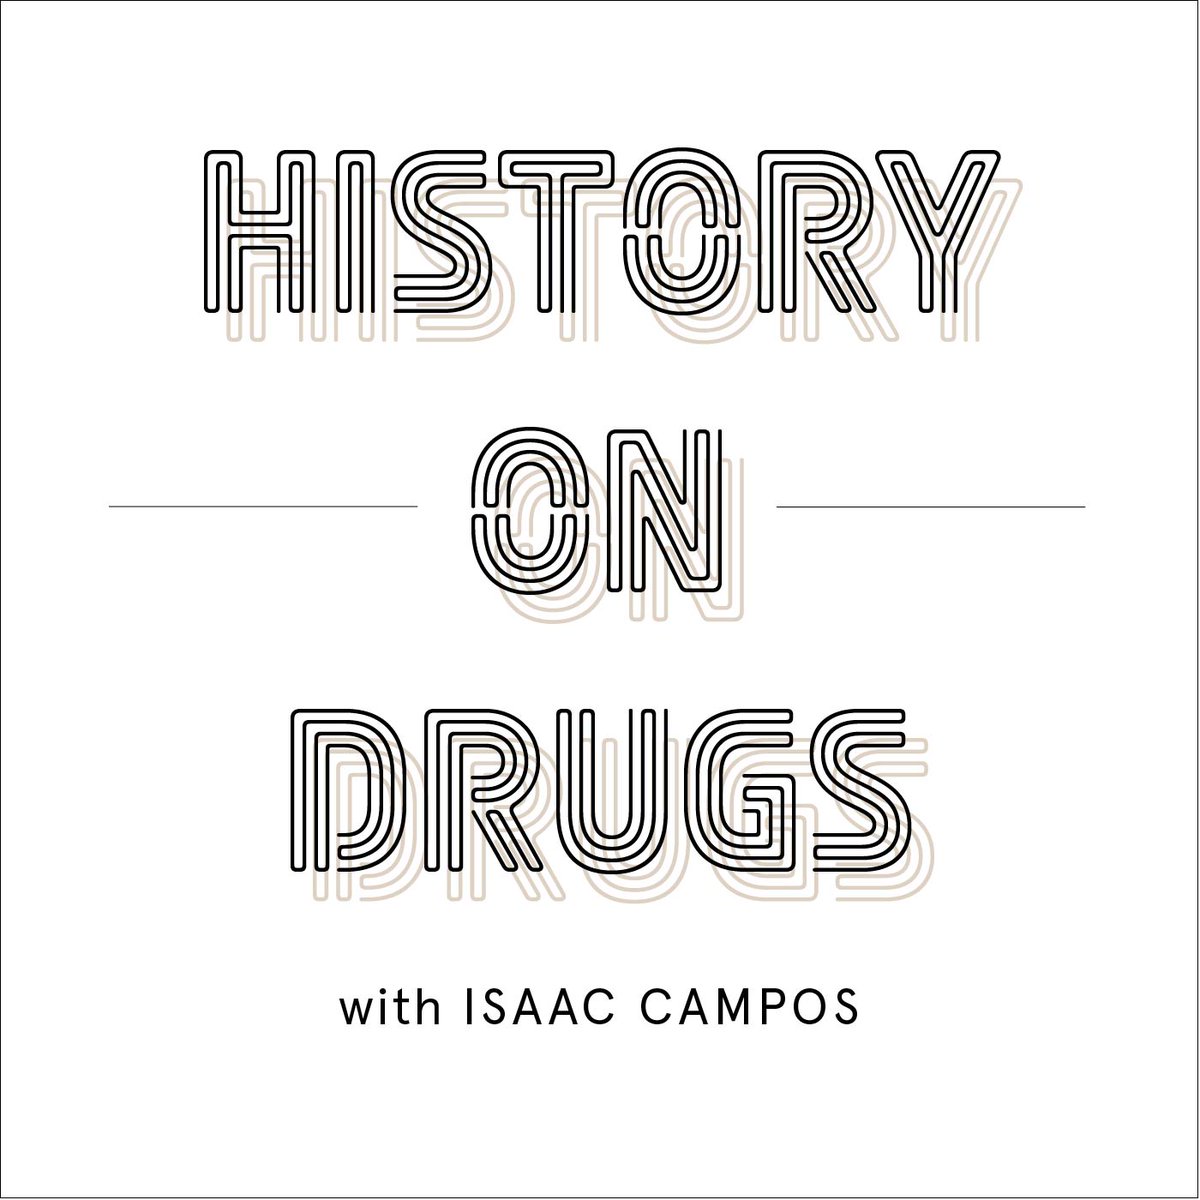 In Episode #3 of the History on Drugs podcast I talk to historian Nancy Campbell about her life and a quarter century of researching and publishing on drugs, gender, addiction, and overdose. Enjoy! Apple: shorturl.at/bosB8 Spotify: shorturl.at/gltyH @drughistory